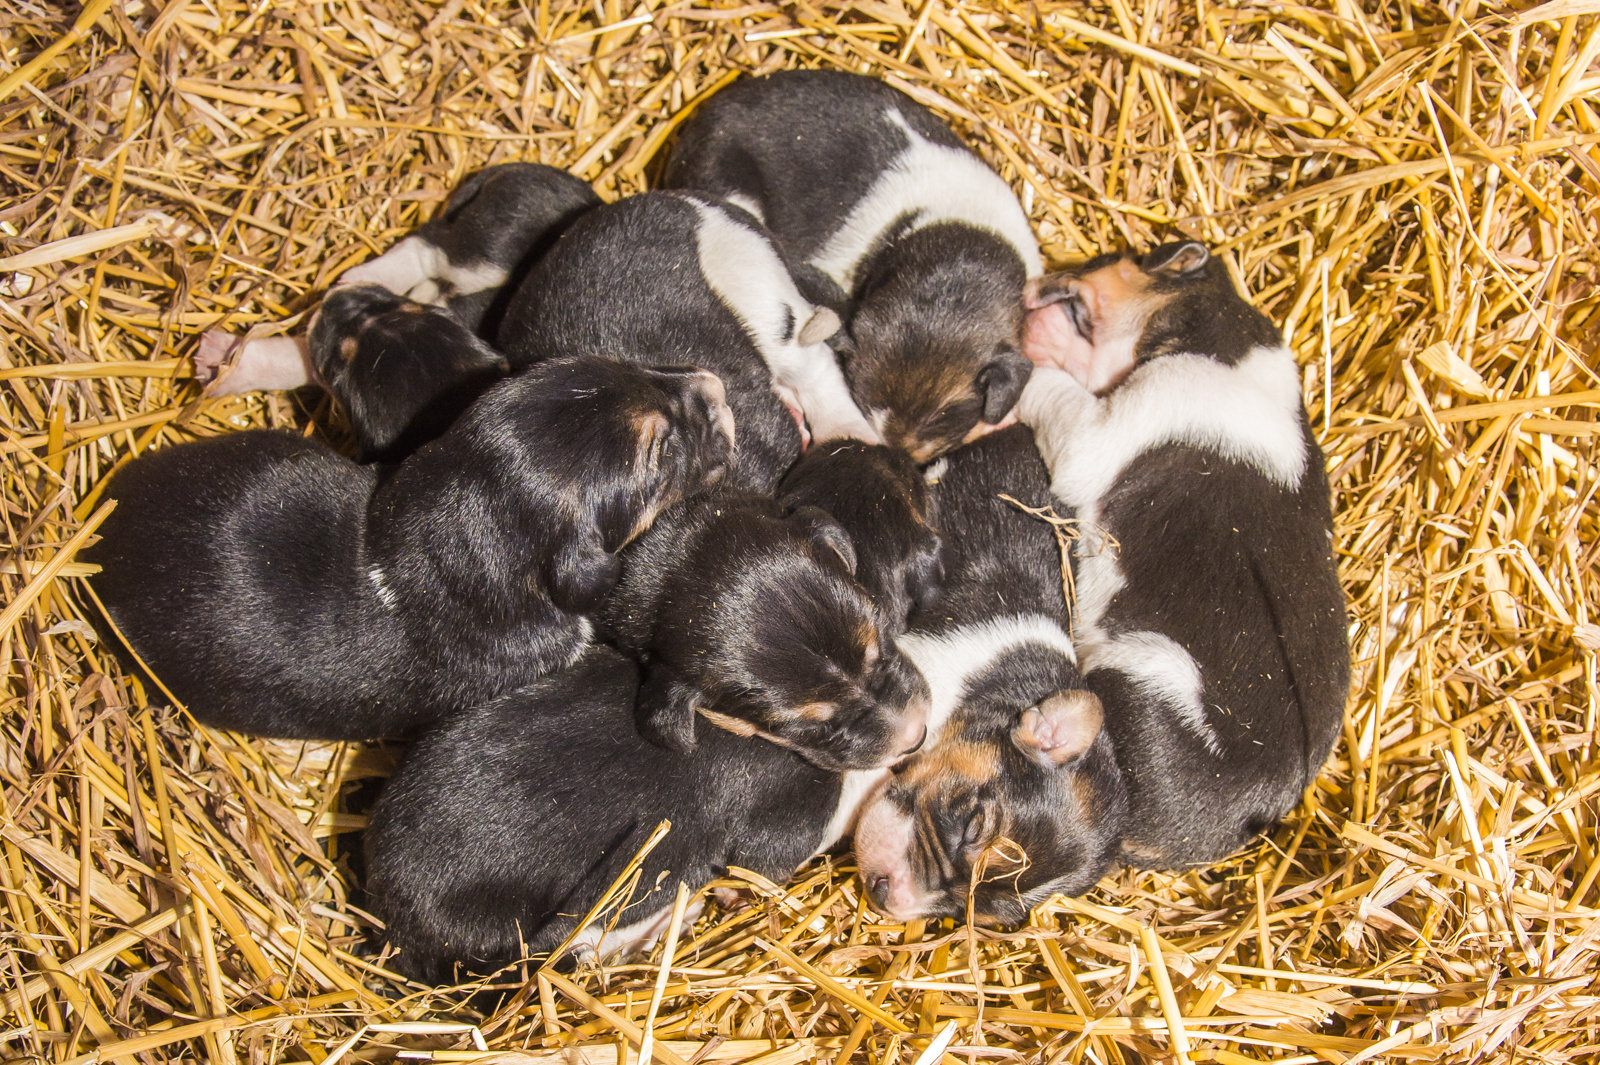 At 2 weeks old, a litter of Old English Hounds